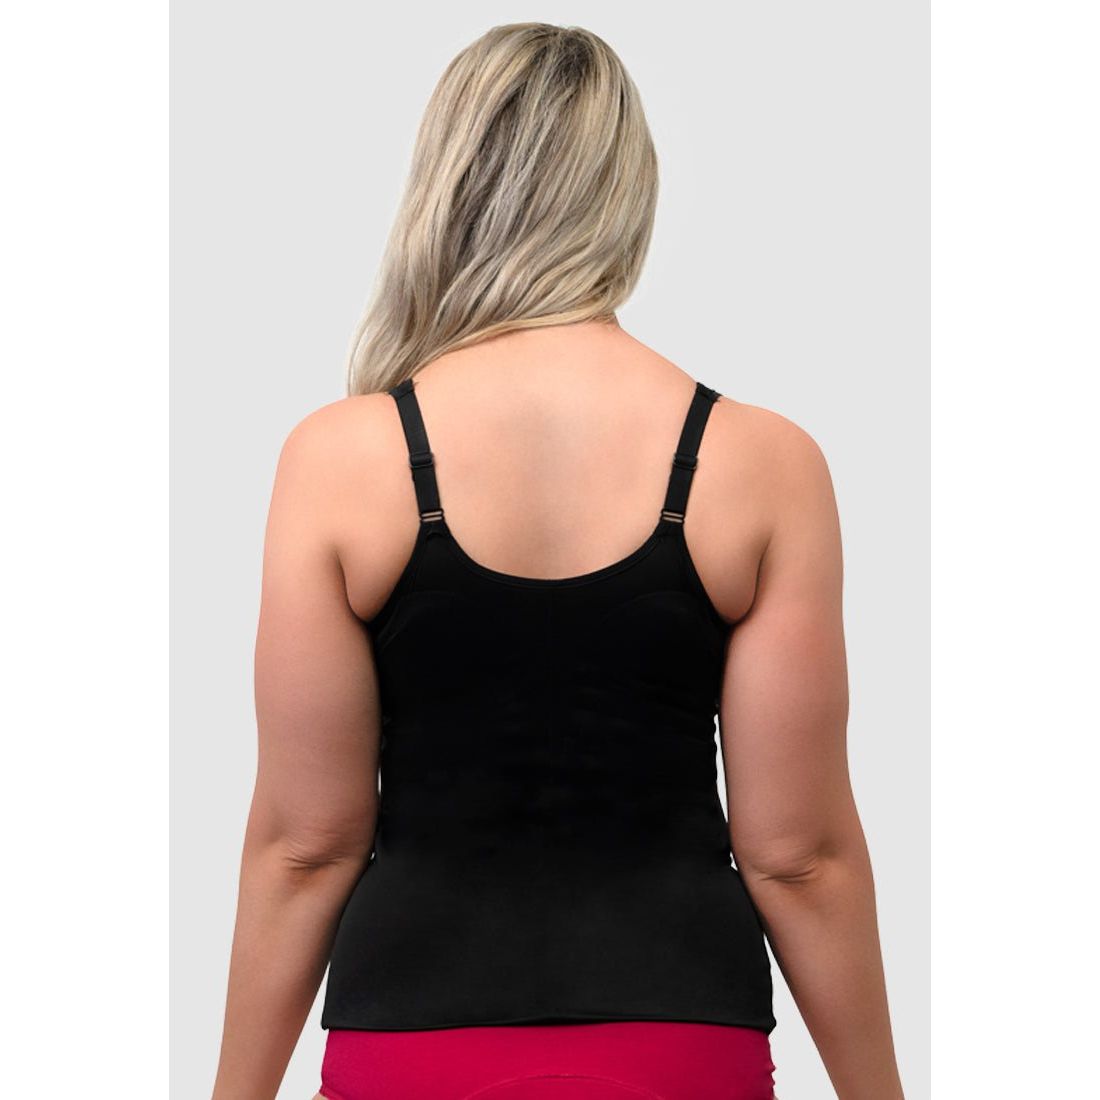 Even MoreÂ® Full Bust Shaping Camisole - Style Gallery